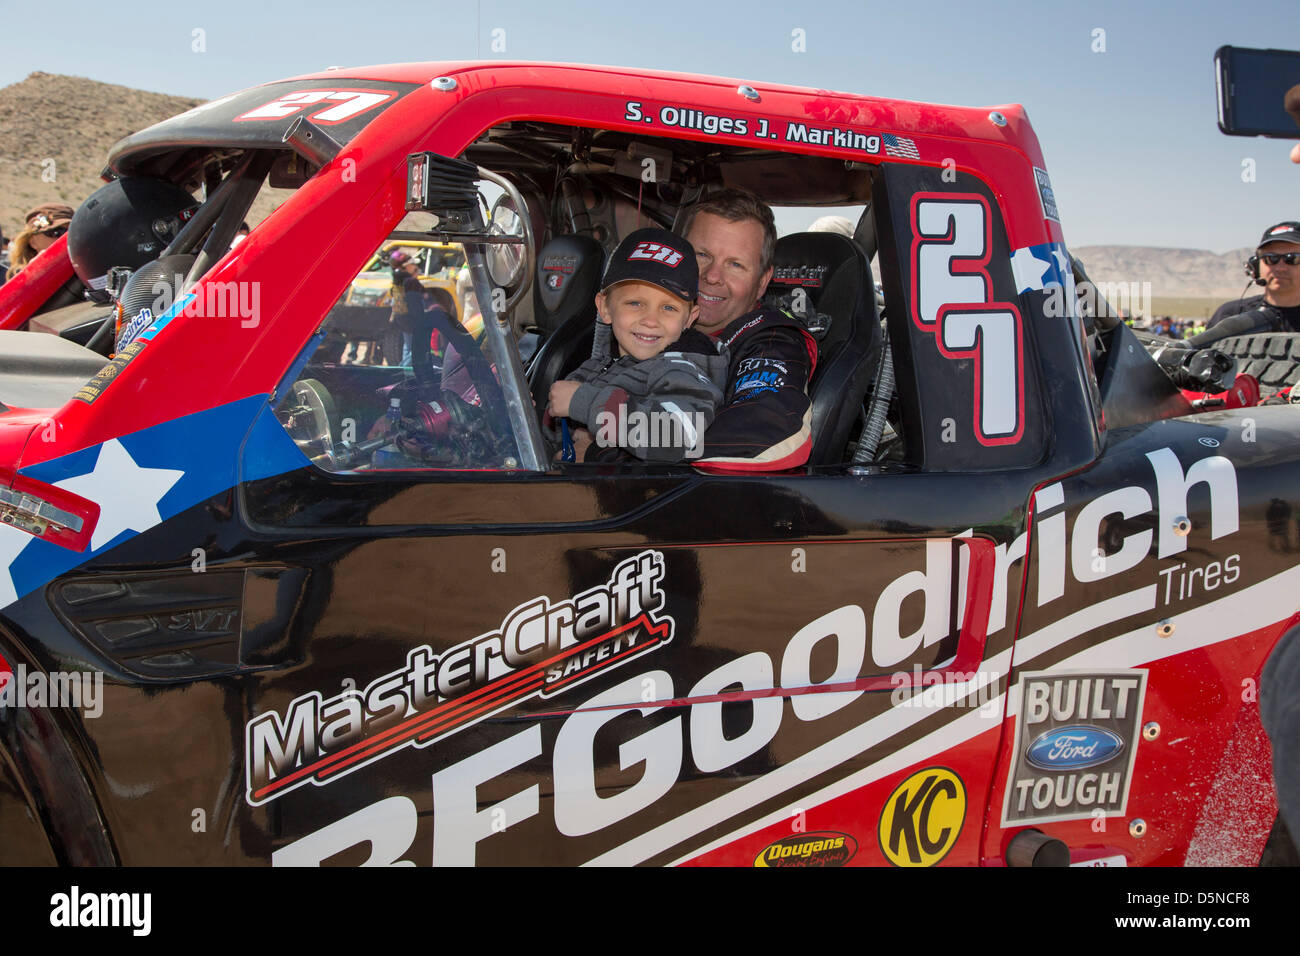 A driver and his son before the start of the Mint 400 off-road auto race through the Mojave Desert. Stock Photo